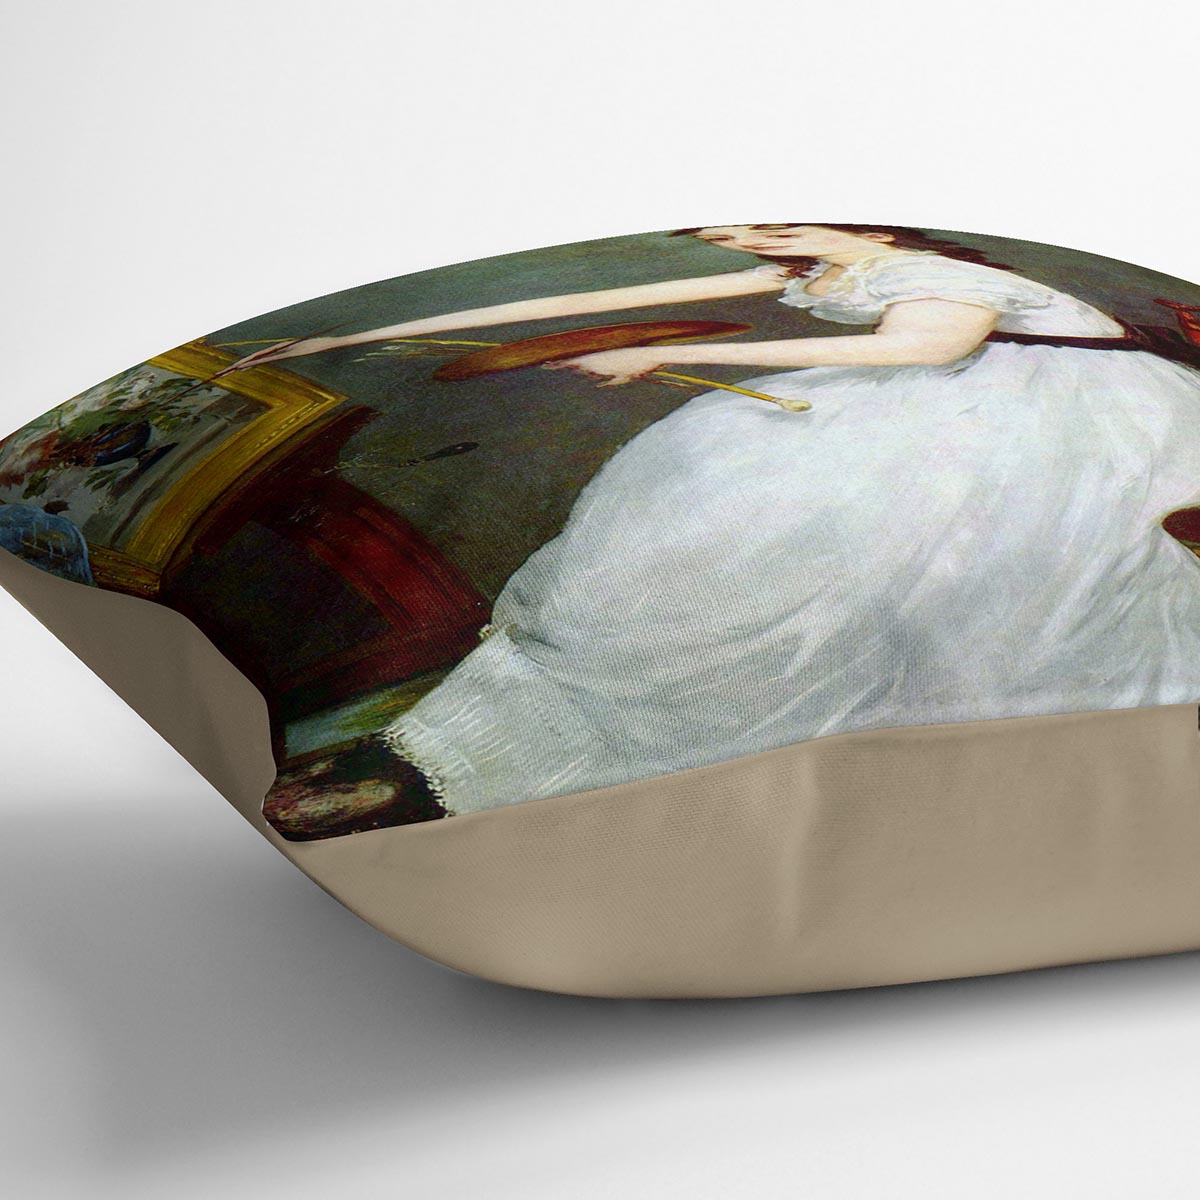 Portrait of Eva GonzalCs in Manets studio by Manet Cushion